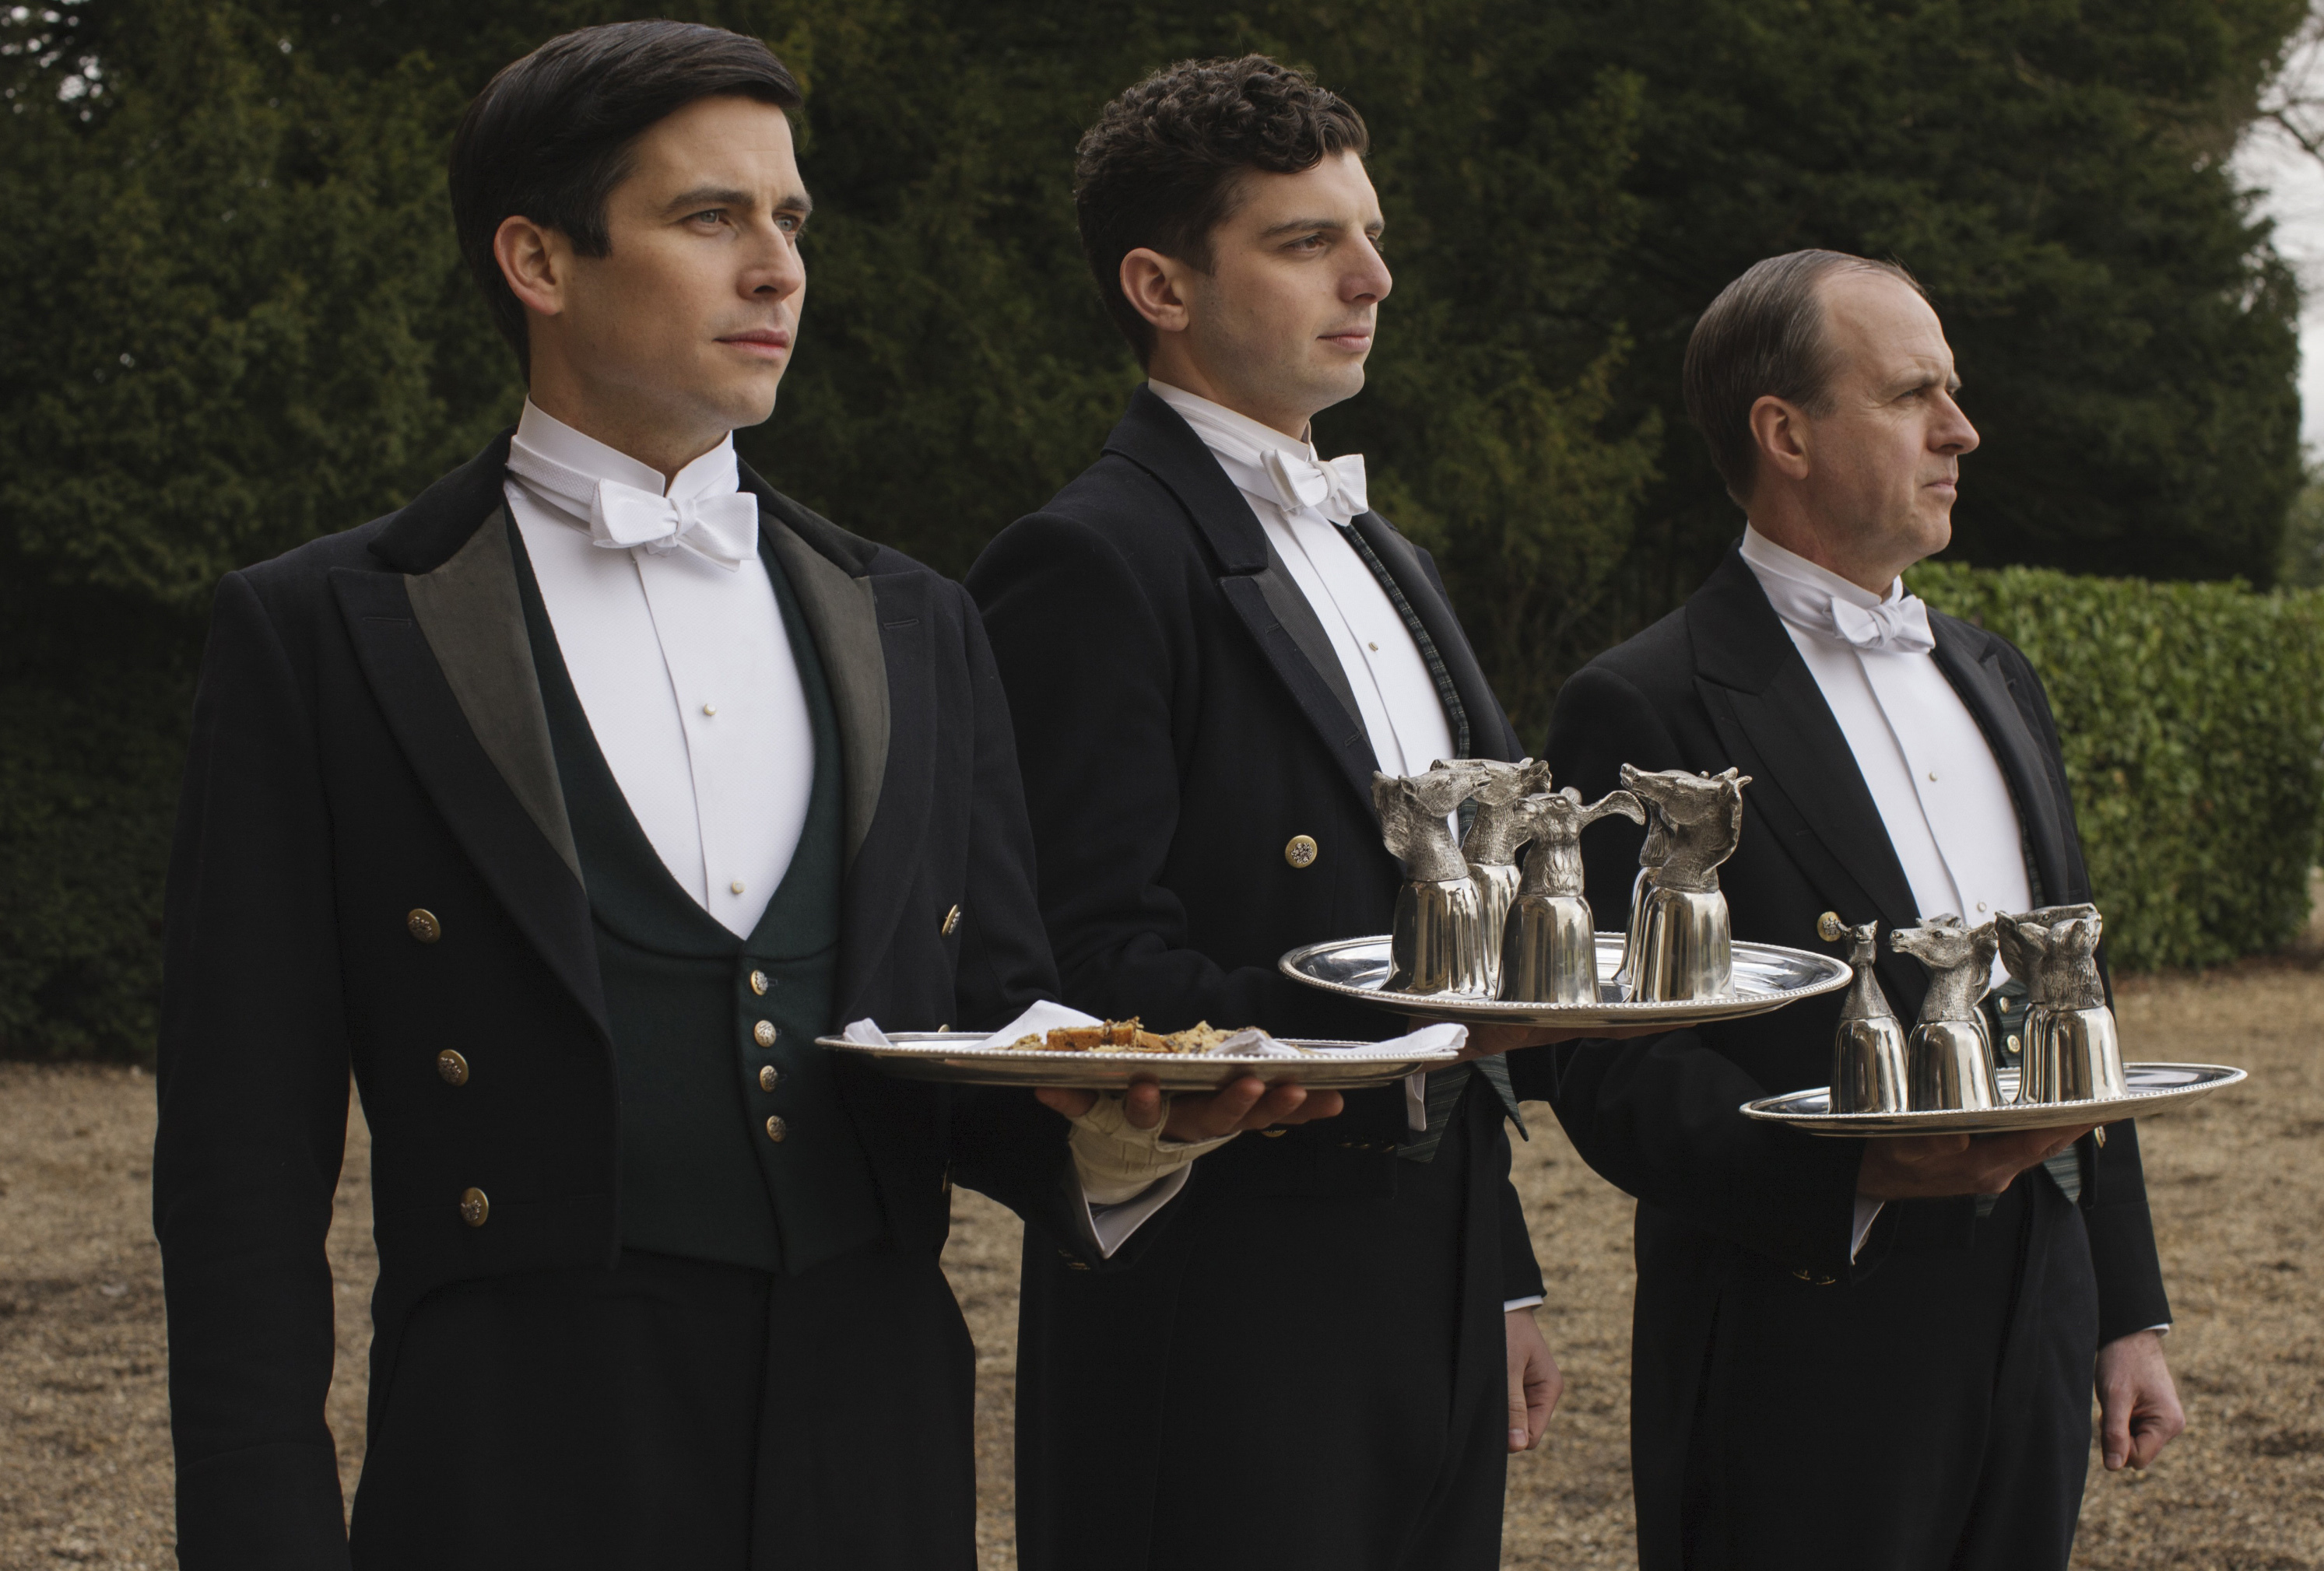 <p>While it's clear the footmen's uniforms are pressed and starched to perfection, the details are there too. Season 5 and 6 "Downton Abbey" costume designer Anna Mary Scott Robbins, who also worked on the movie, told <a href="https://www.vogue.co.uk/article/downton-abbey-film-costumes-anna-jones-interview">Vogue</a> that she made sure the buttons on the livery were stamped with the Grantham family coat of arms, delivering an extra dose of authenticity.</p>